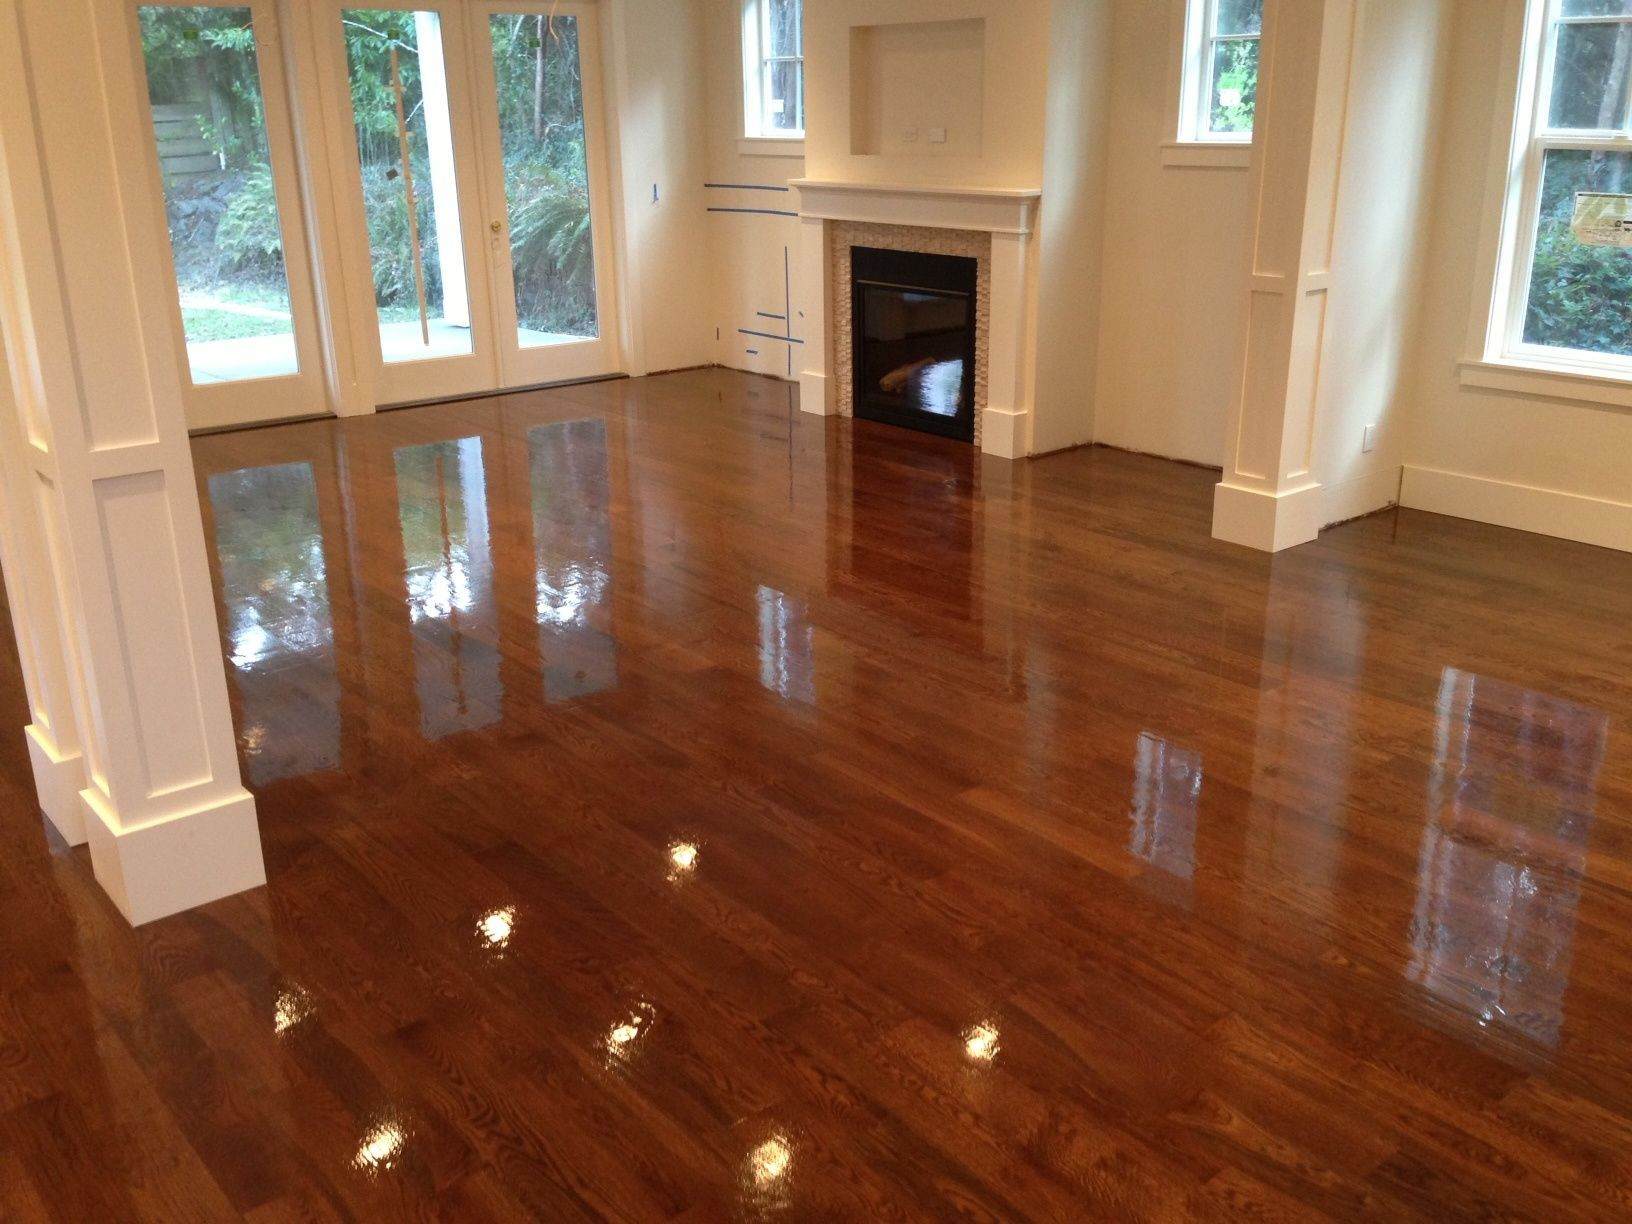 popular hardwood floor stain colors of express flooring has outlets in glendale tucson and all neighboring within hardwood floors seattle hardwood floor refinishing and installation seattle tacoma moore floors inc